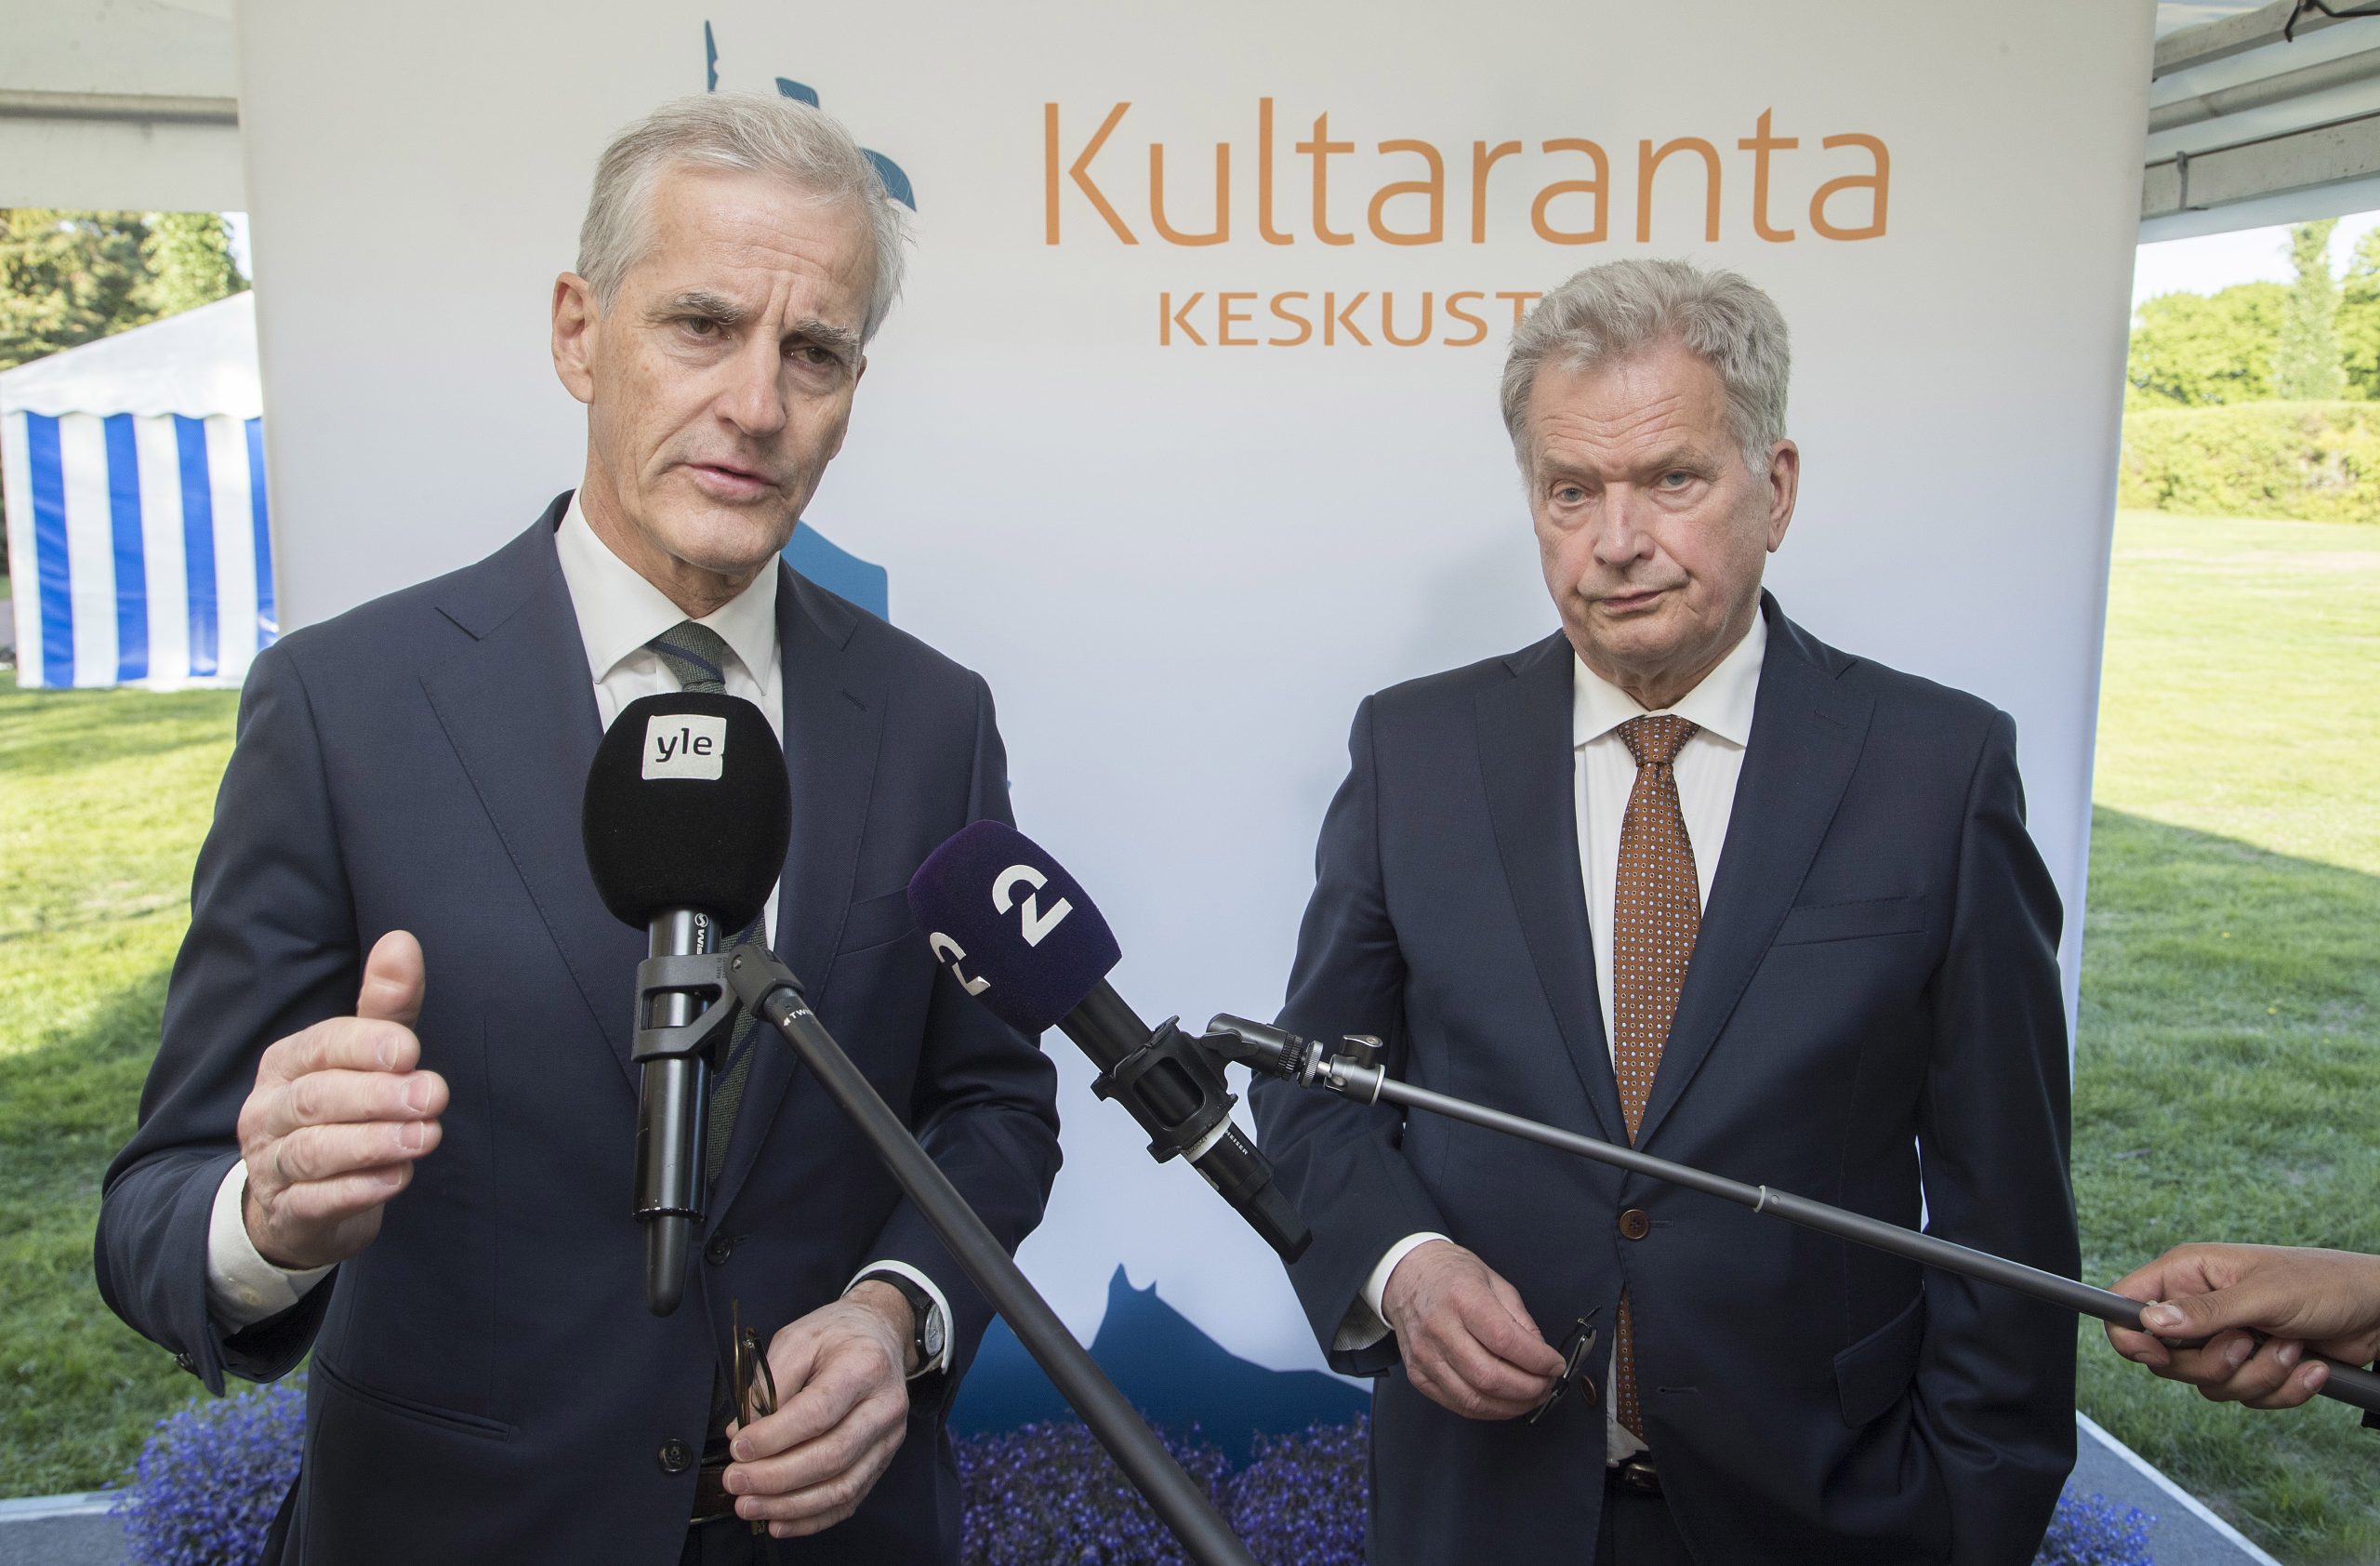 epa10009891 Finland President Sauli Niinisto (R) and Prime Minister of Norway Jonas Gahr Store speak during The Kultaranta Talks in Naantali Finland, Finland, 12 June 2022. The Kultaranta Talks is being hosted by President Sauli Niinisto on 12-13 June 2022. This year, the title of this foreing and security policy discussion event is 'Responsible, strong and stable Nordic region'. The main guests are NATO Secretary General Jens Stoltenberg and Prime Minister of Norway Jonas Gahr Store at the Presidential summer residence Kultaranta, located on the island of Luonnonmaa.  EPA/MAURI RATILAINEN